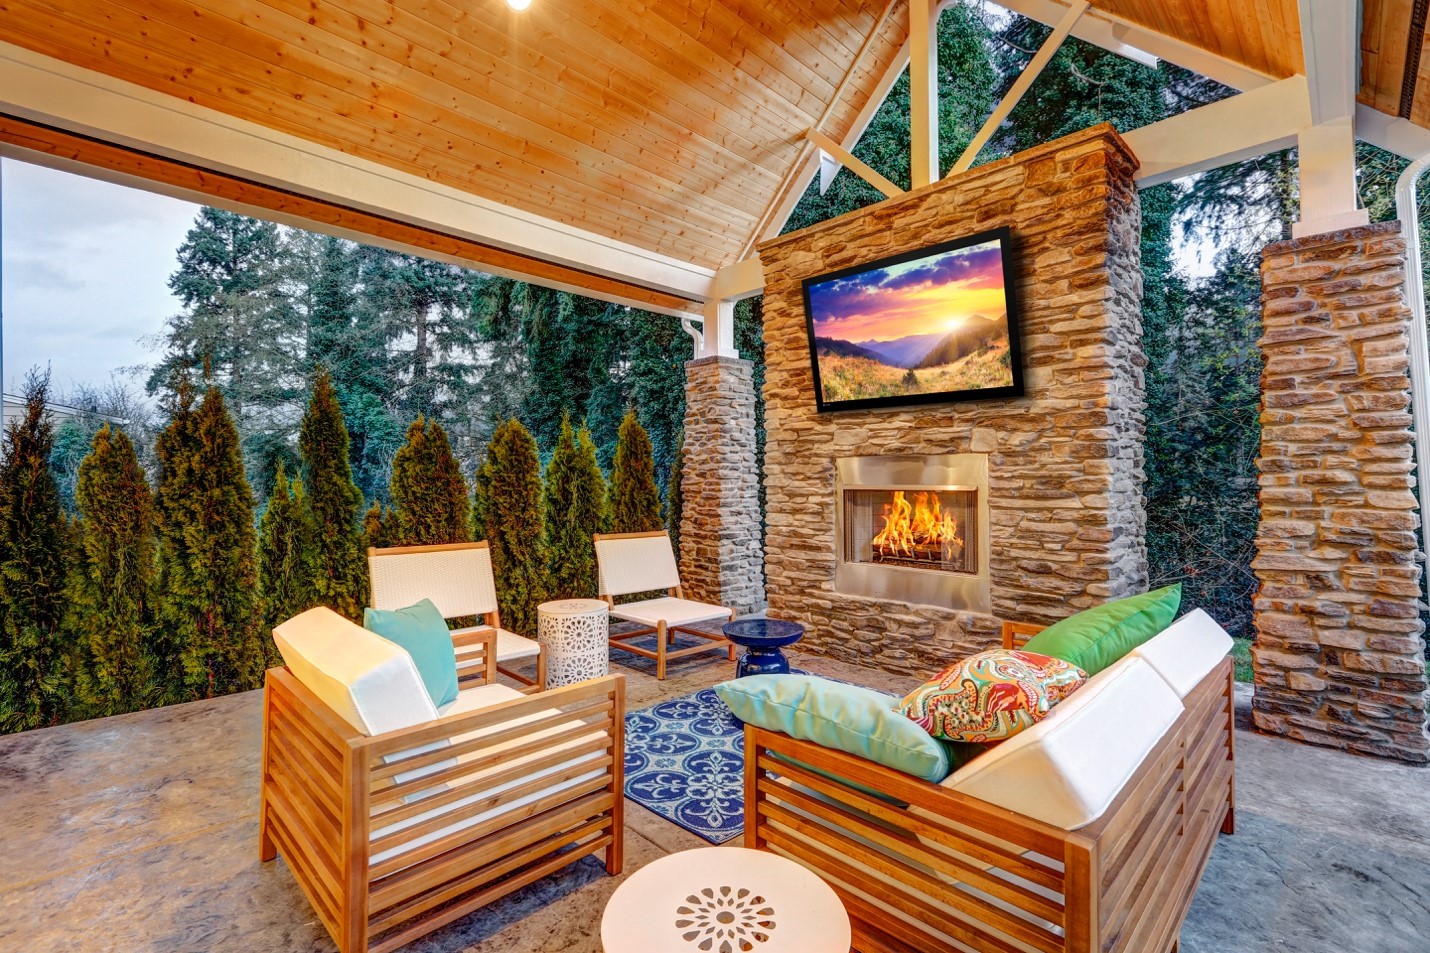 Looking For An Outdoor TV? Here’s What You’ll Want to Know.